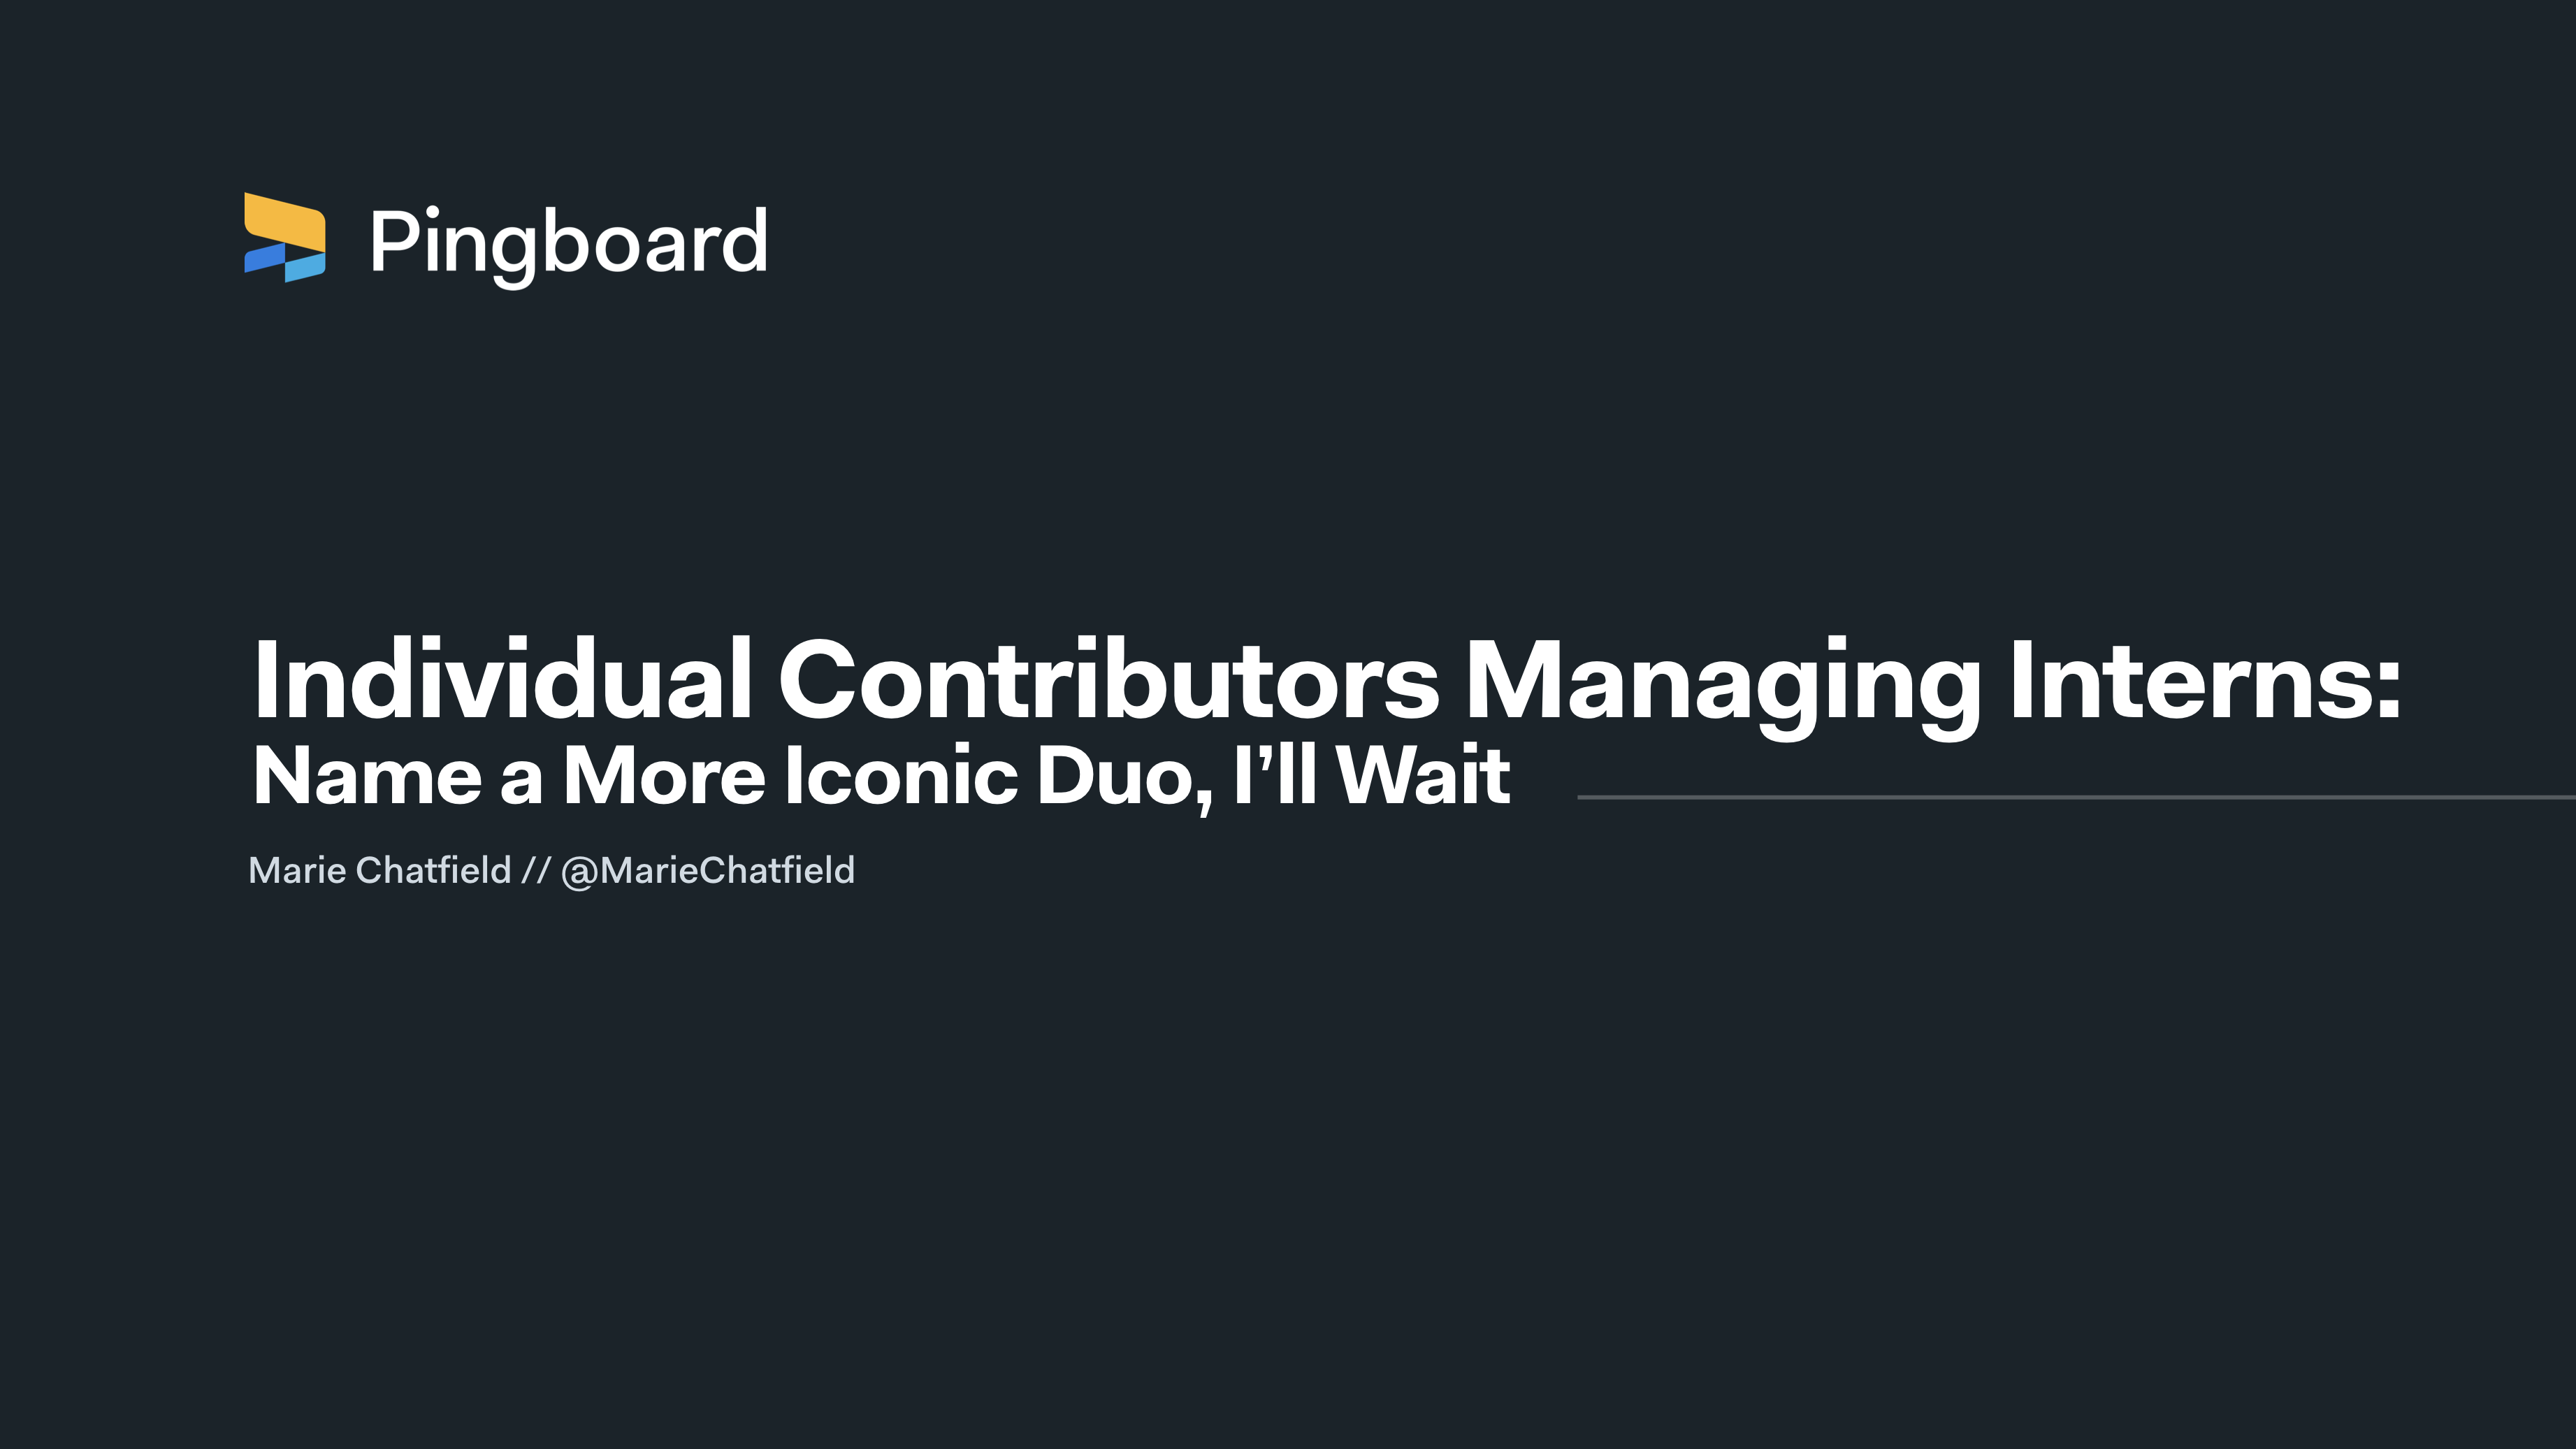 Slide with title Individual Contributors Managing Interns: Name a More Iconic Duo, I'll Wait followed by the name MarieChatfield and handle @MarieChatfield. The Pingboard logo is at the top.